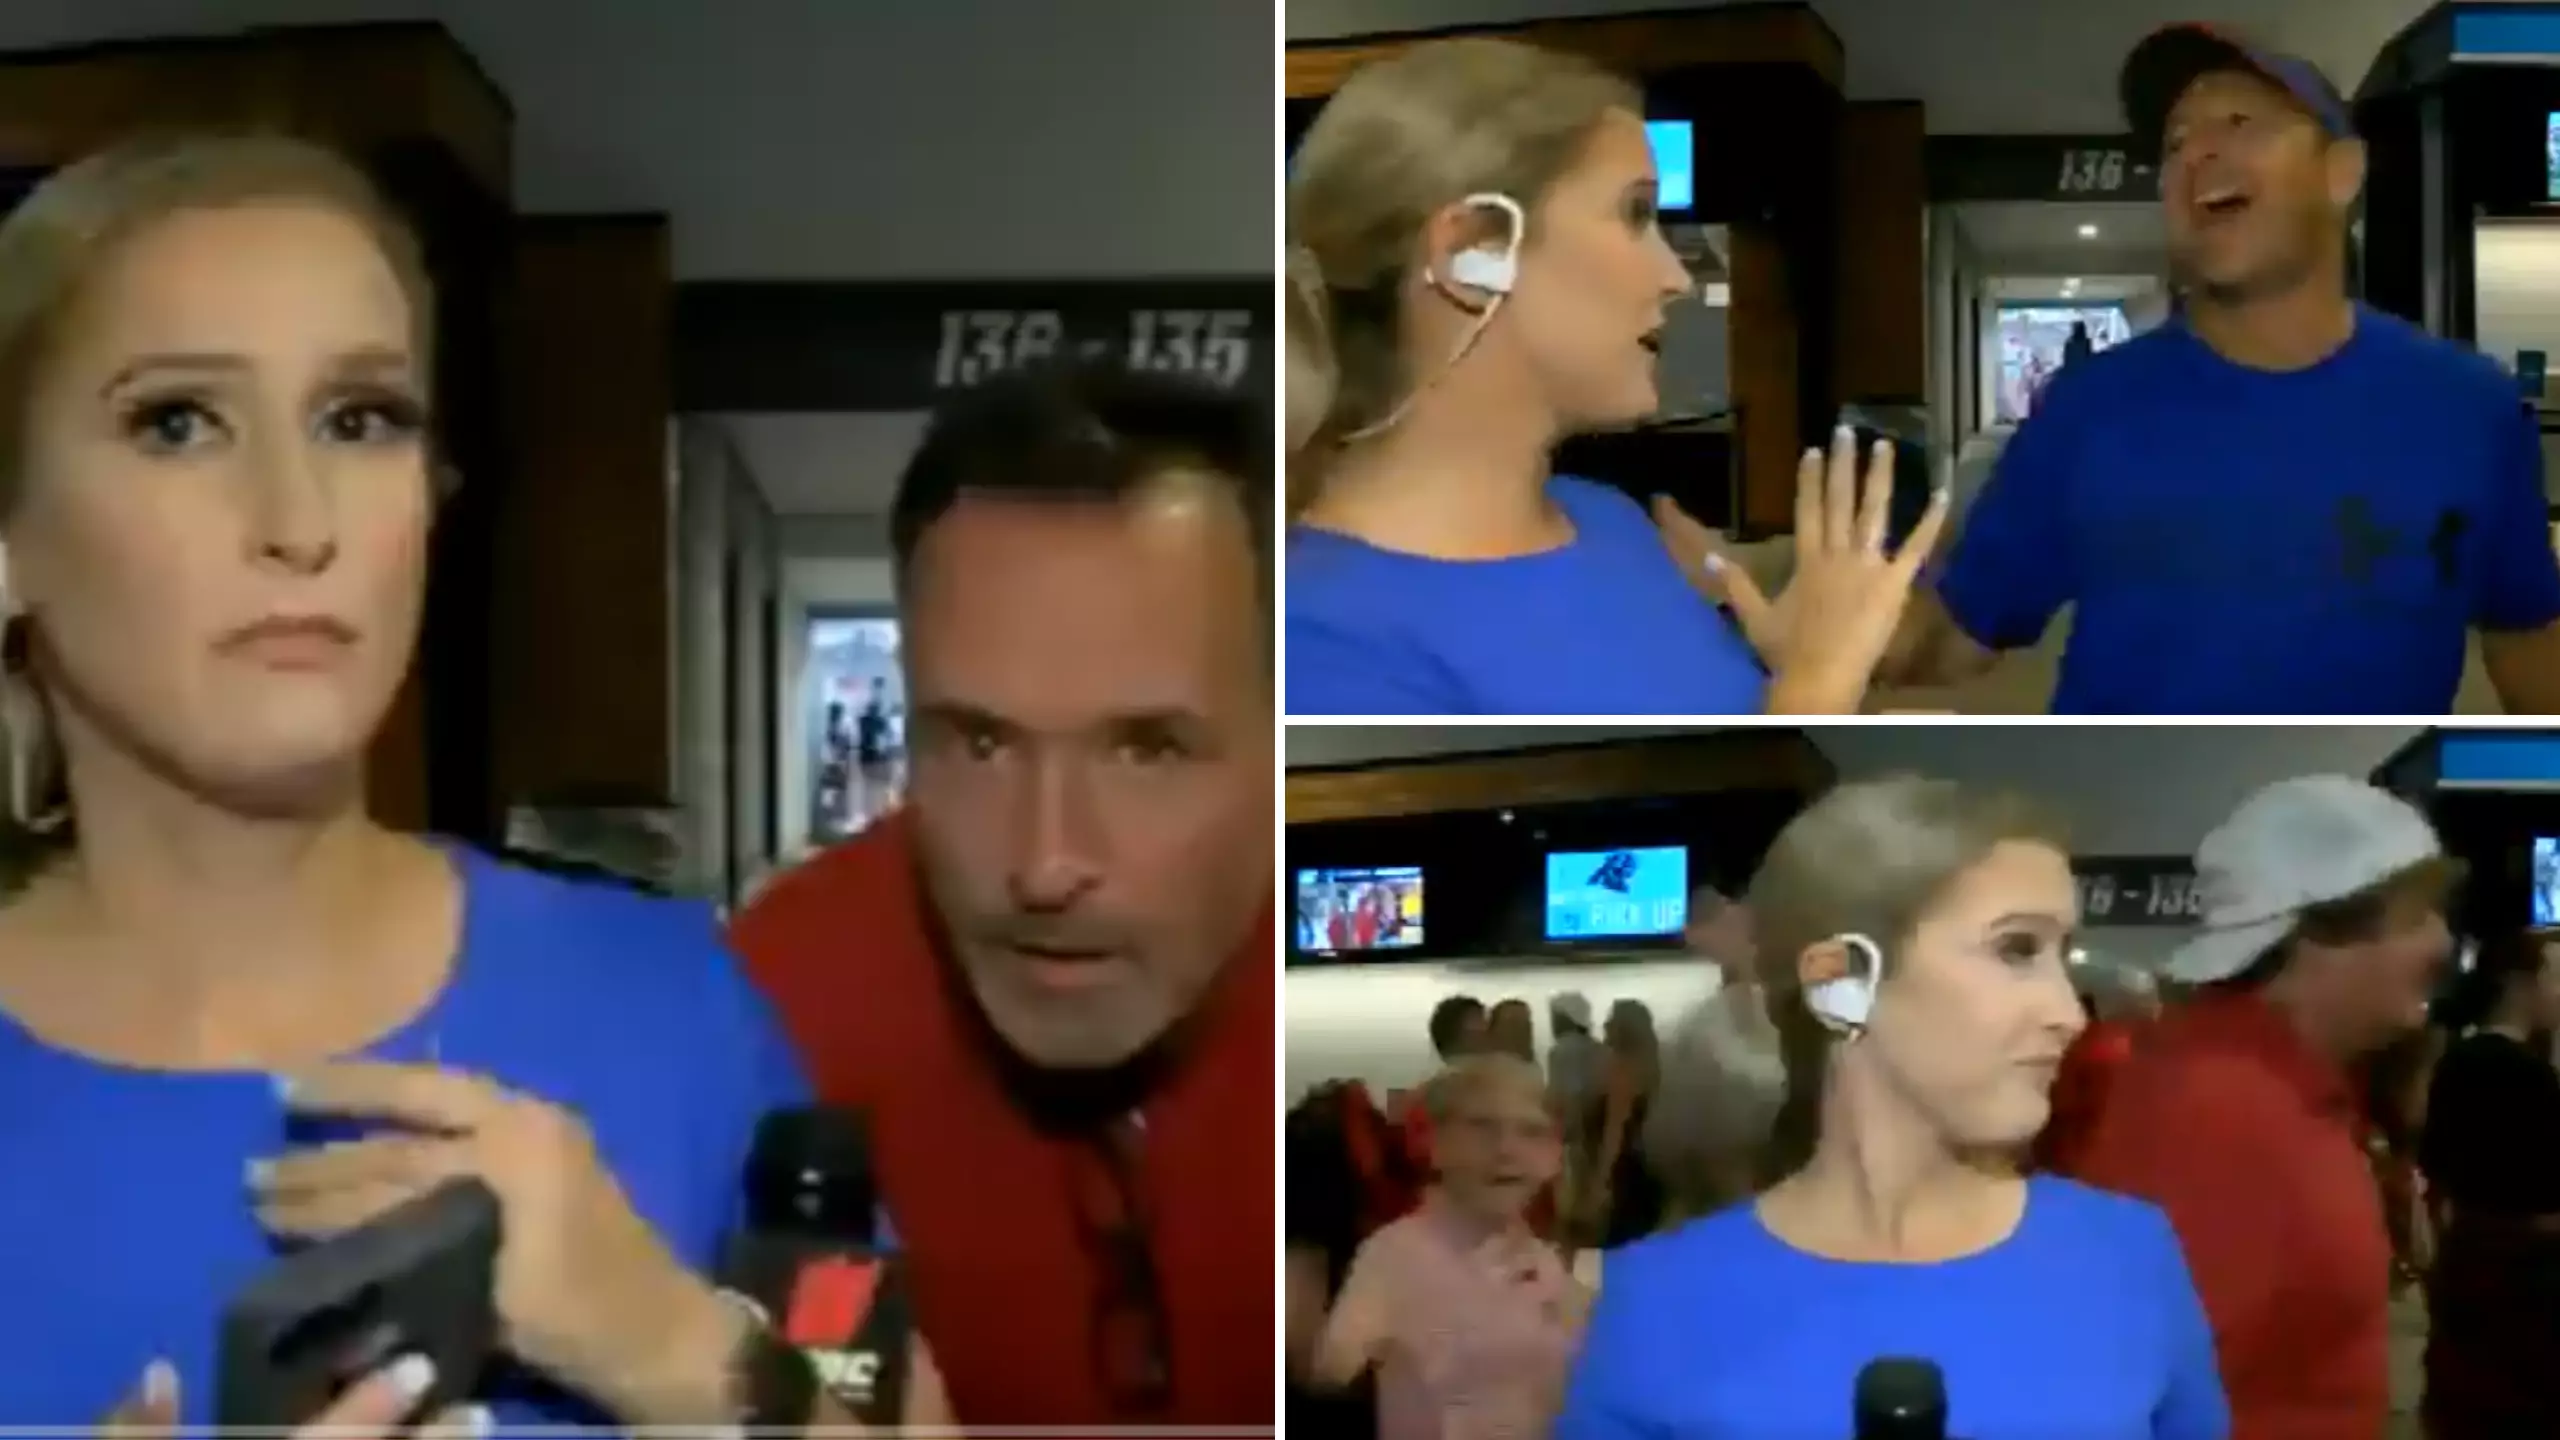 "Don’t Touch Me" - Female Reporter Claims She Was 'Violated' By Fans During Football Game